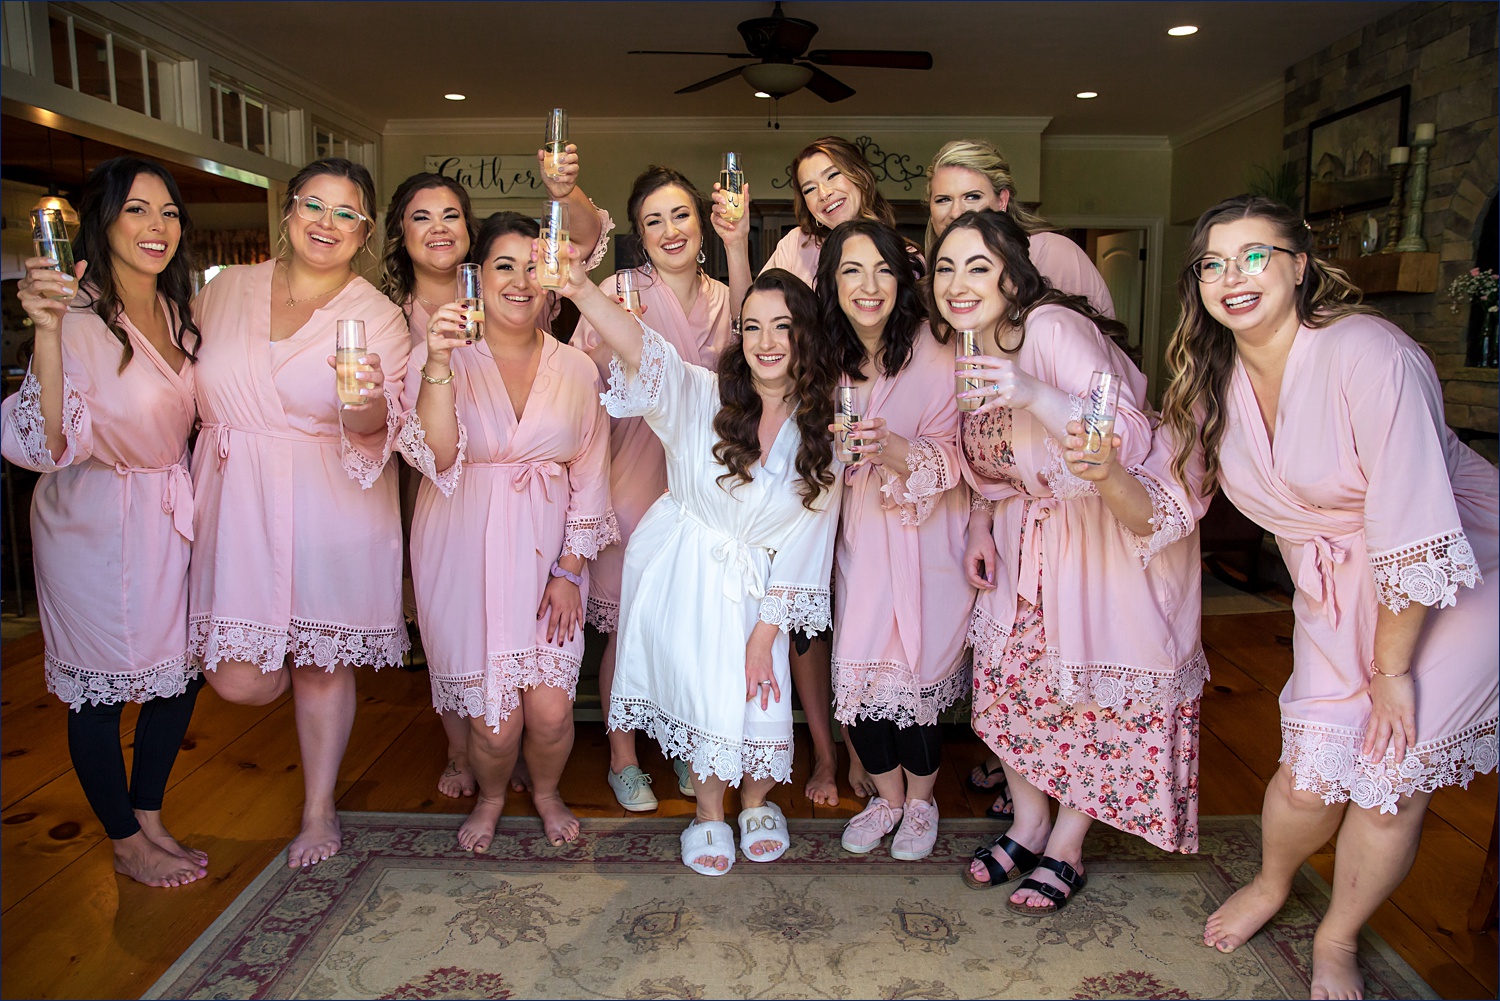 The bride celebrates with her friends on her wedding day